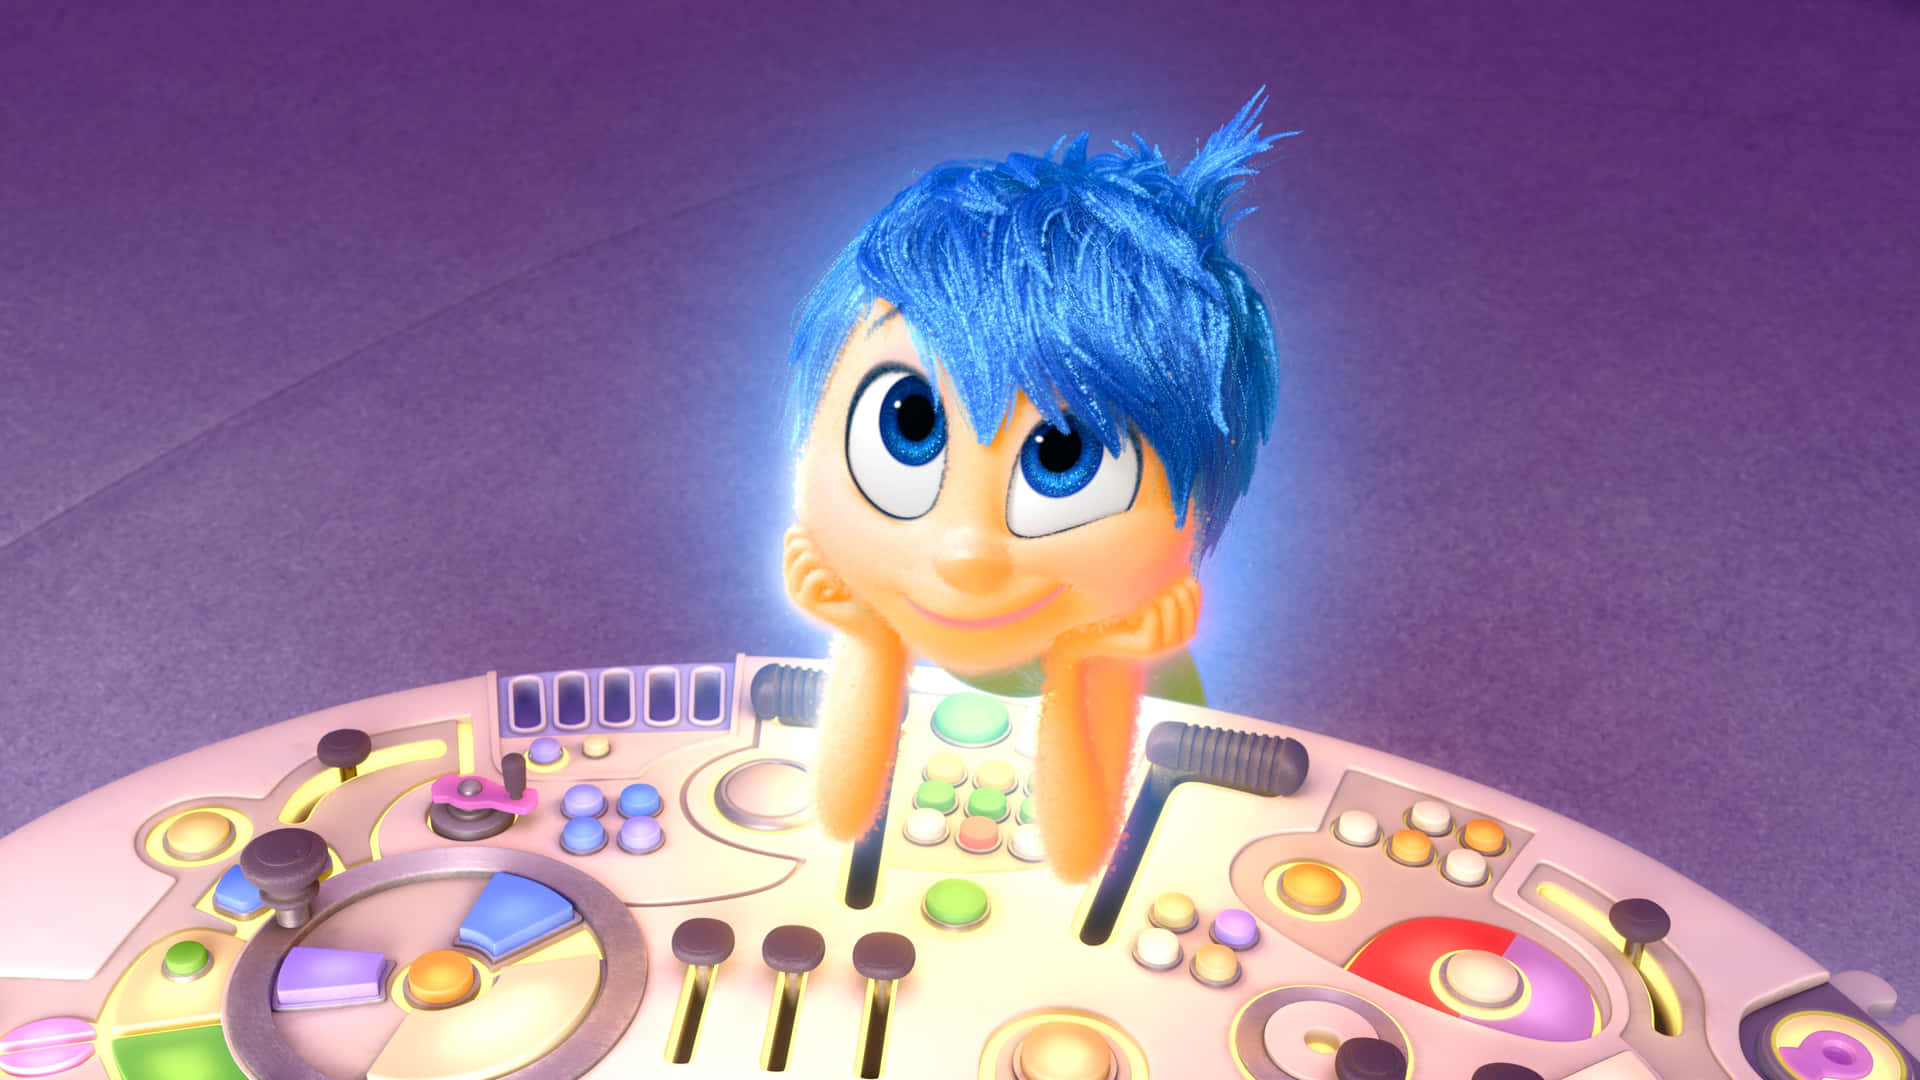 Unlock Your Emotions with Disney's Inside Out